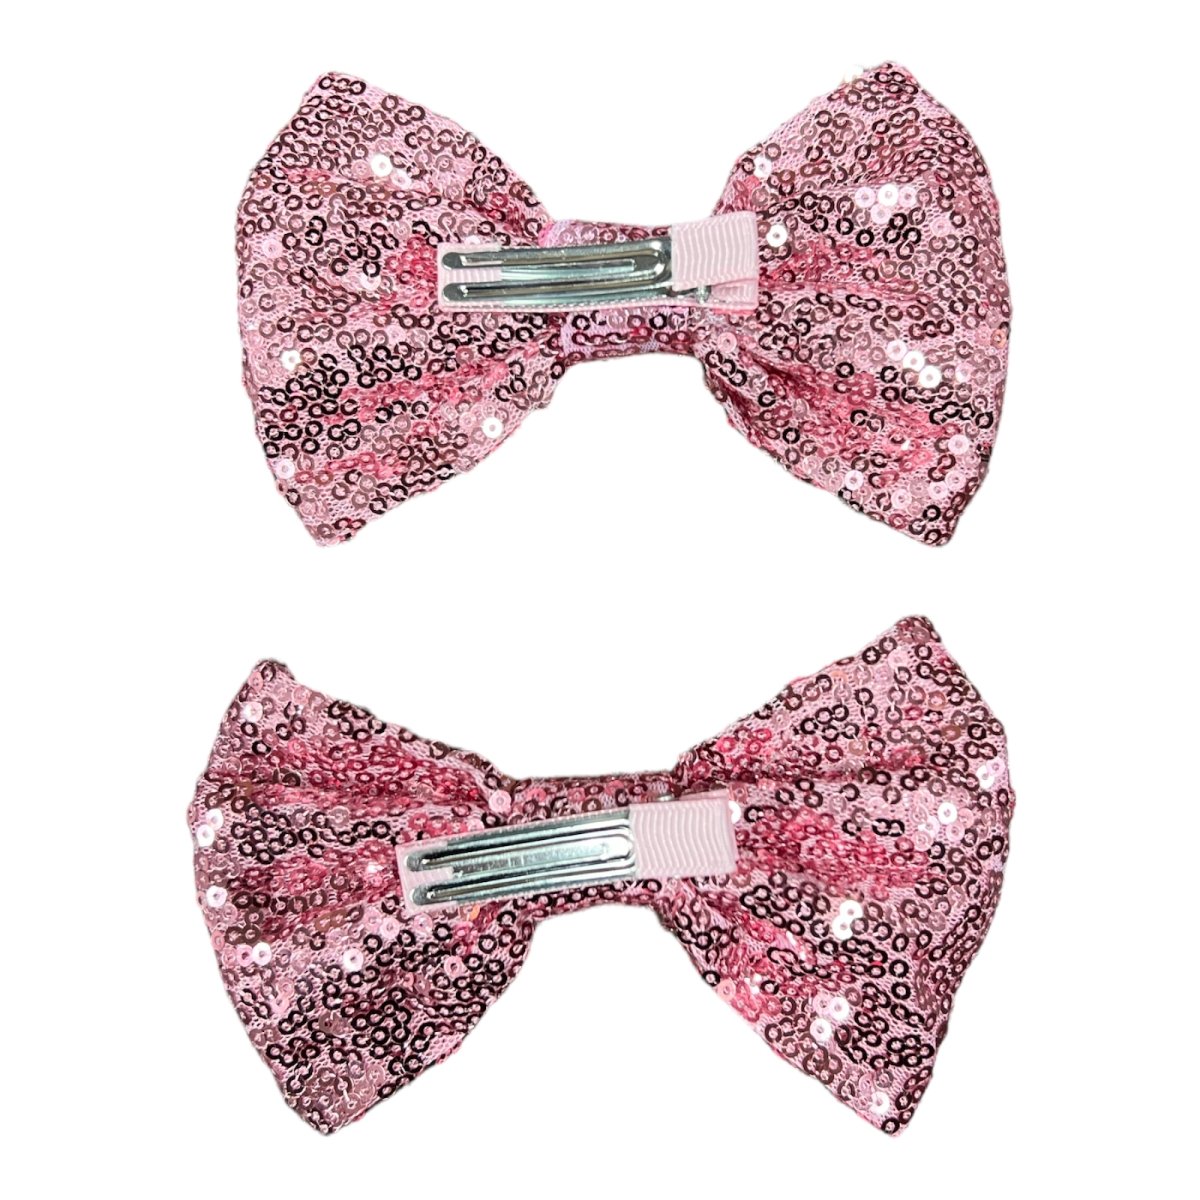 XL SEQUIN BOWS SET OF 2 - CLIPS